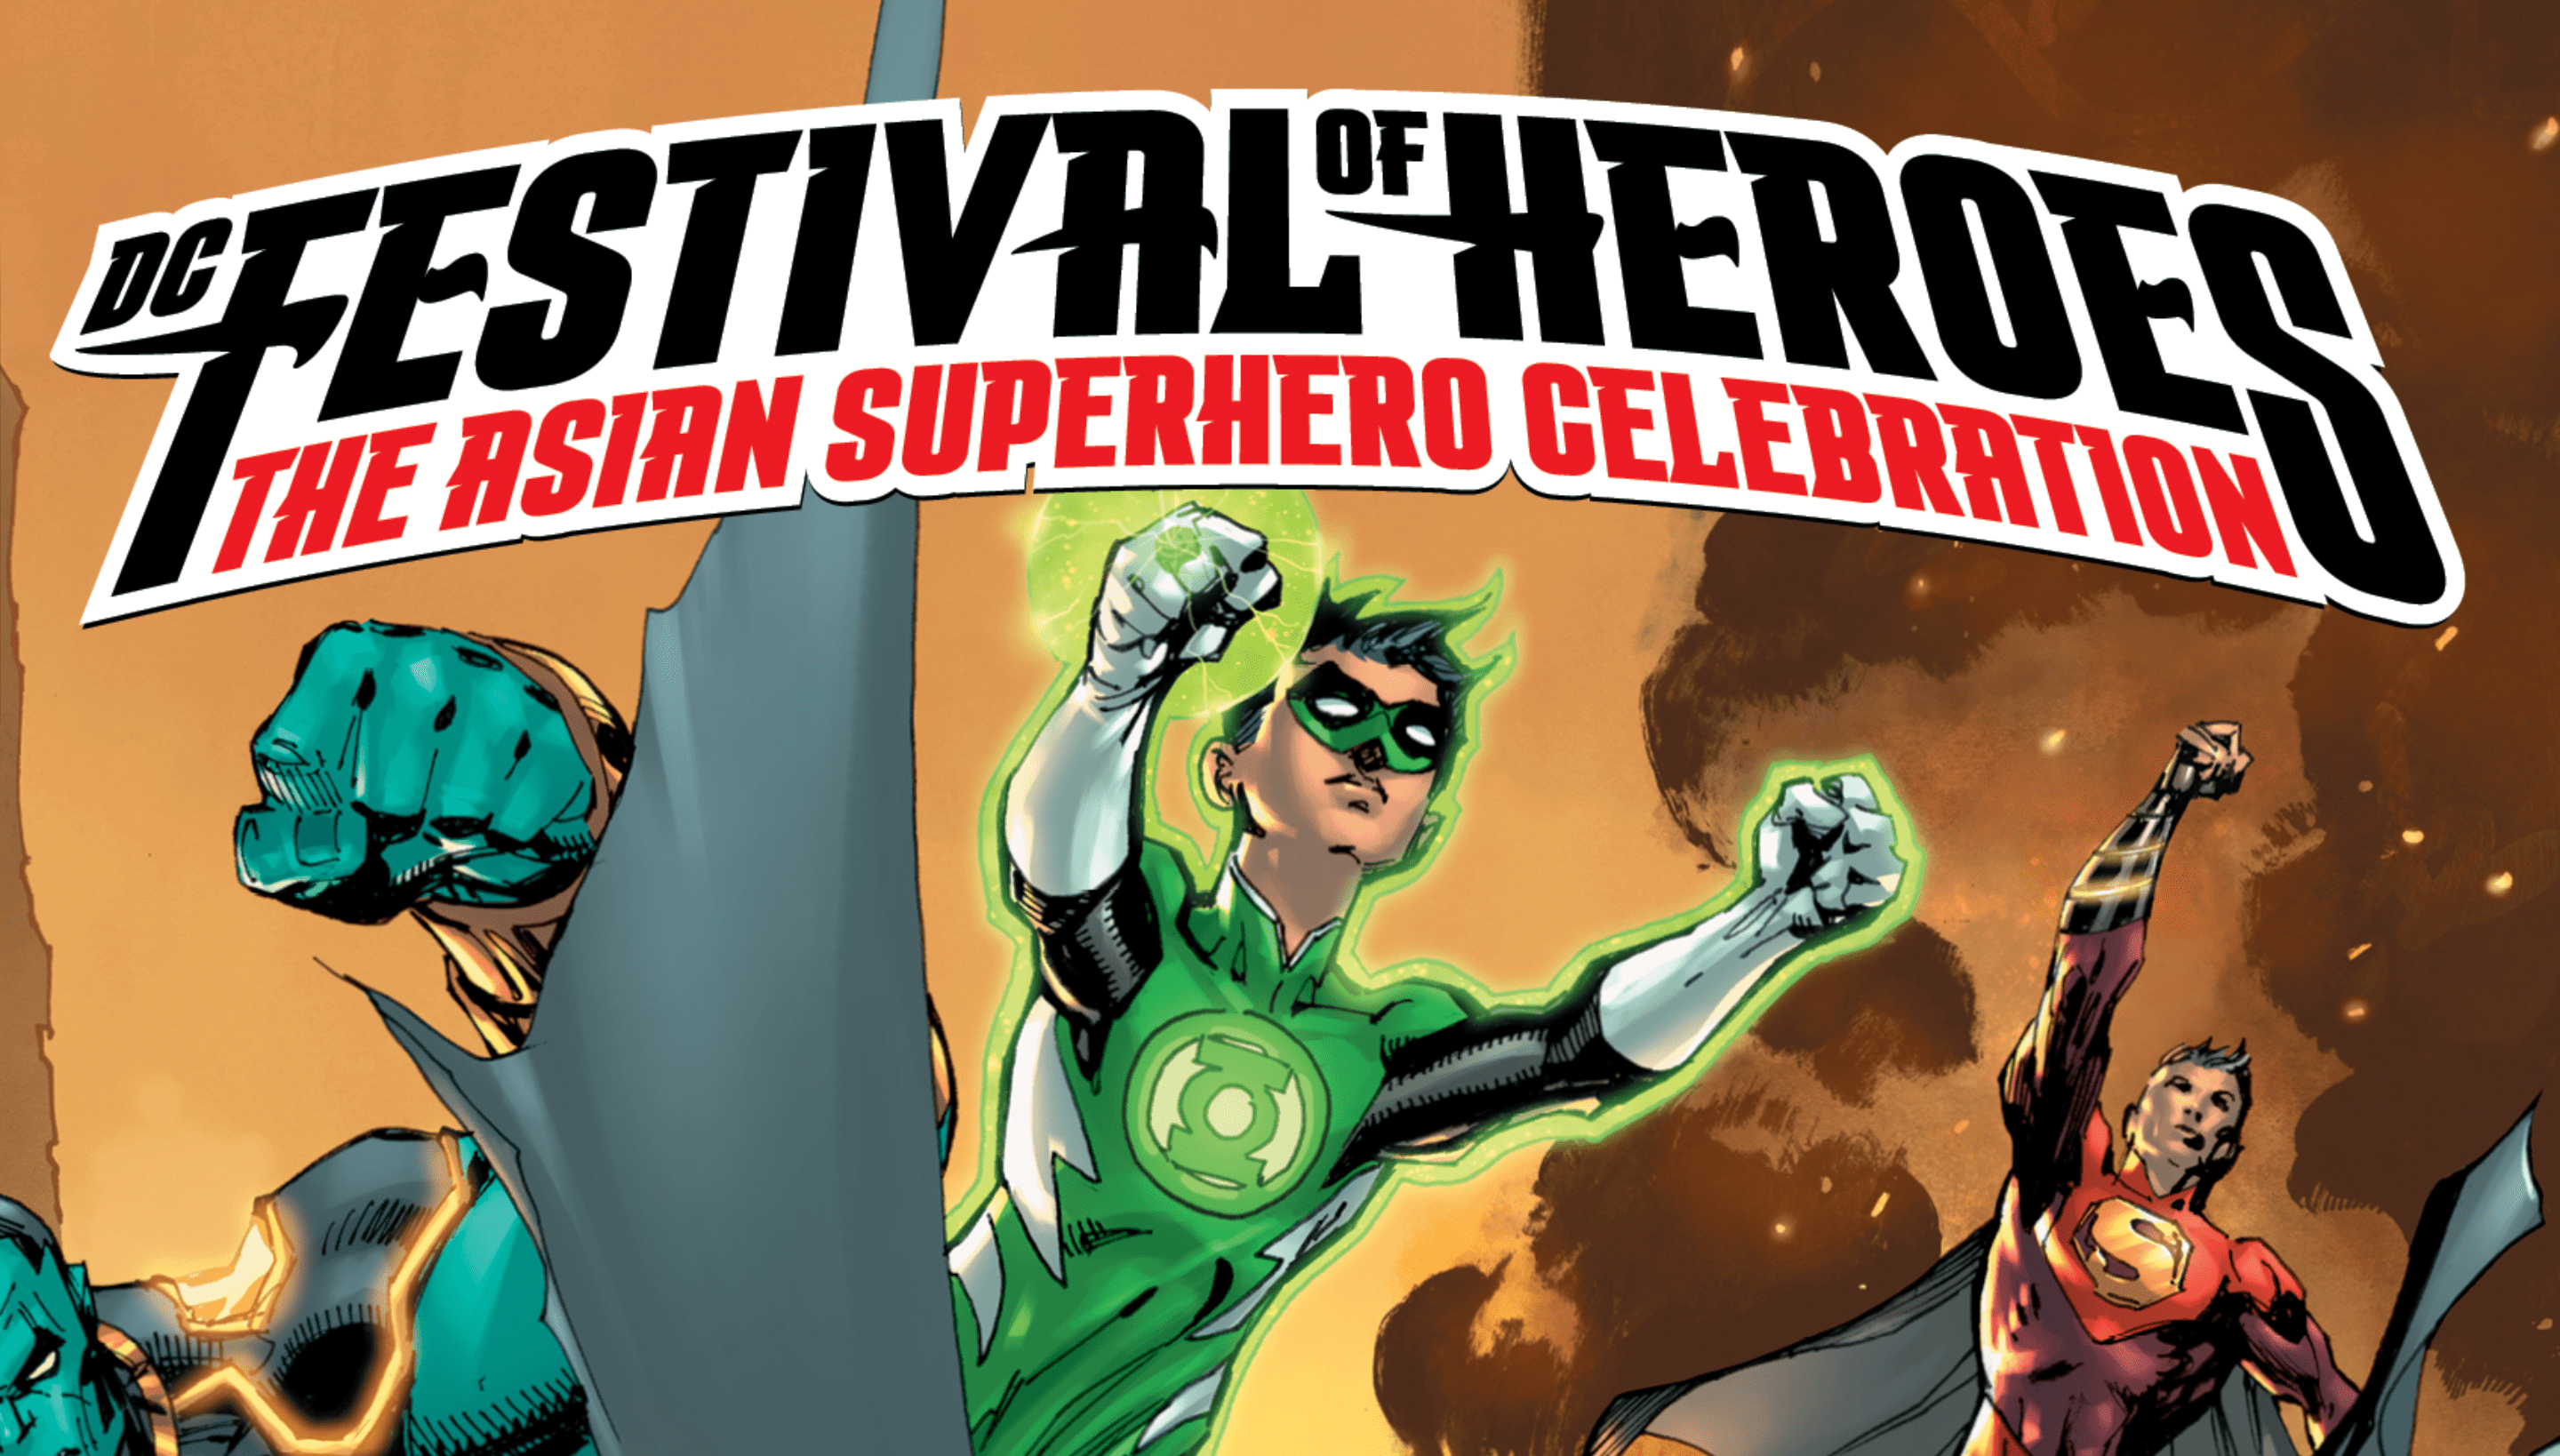 DC Festival Of Heroes: The Asian Superhero Celebration. DC. 11 May. 2021.